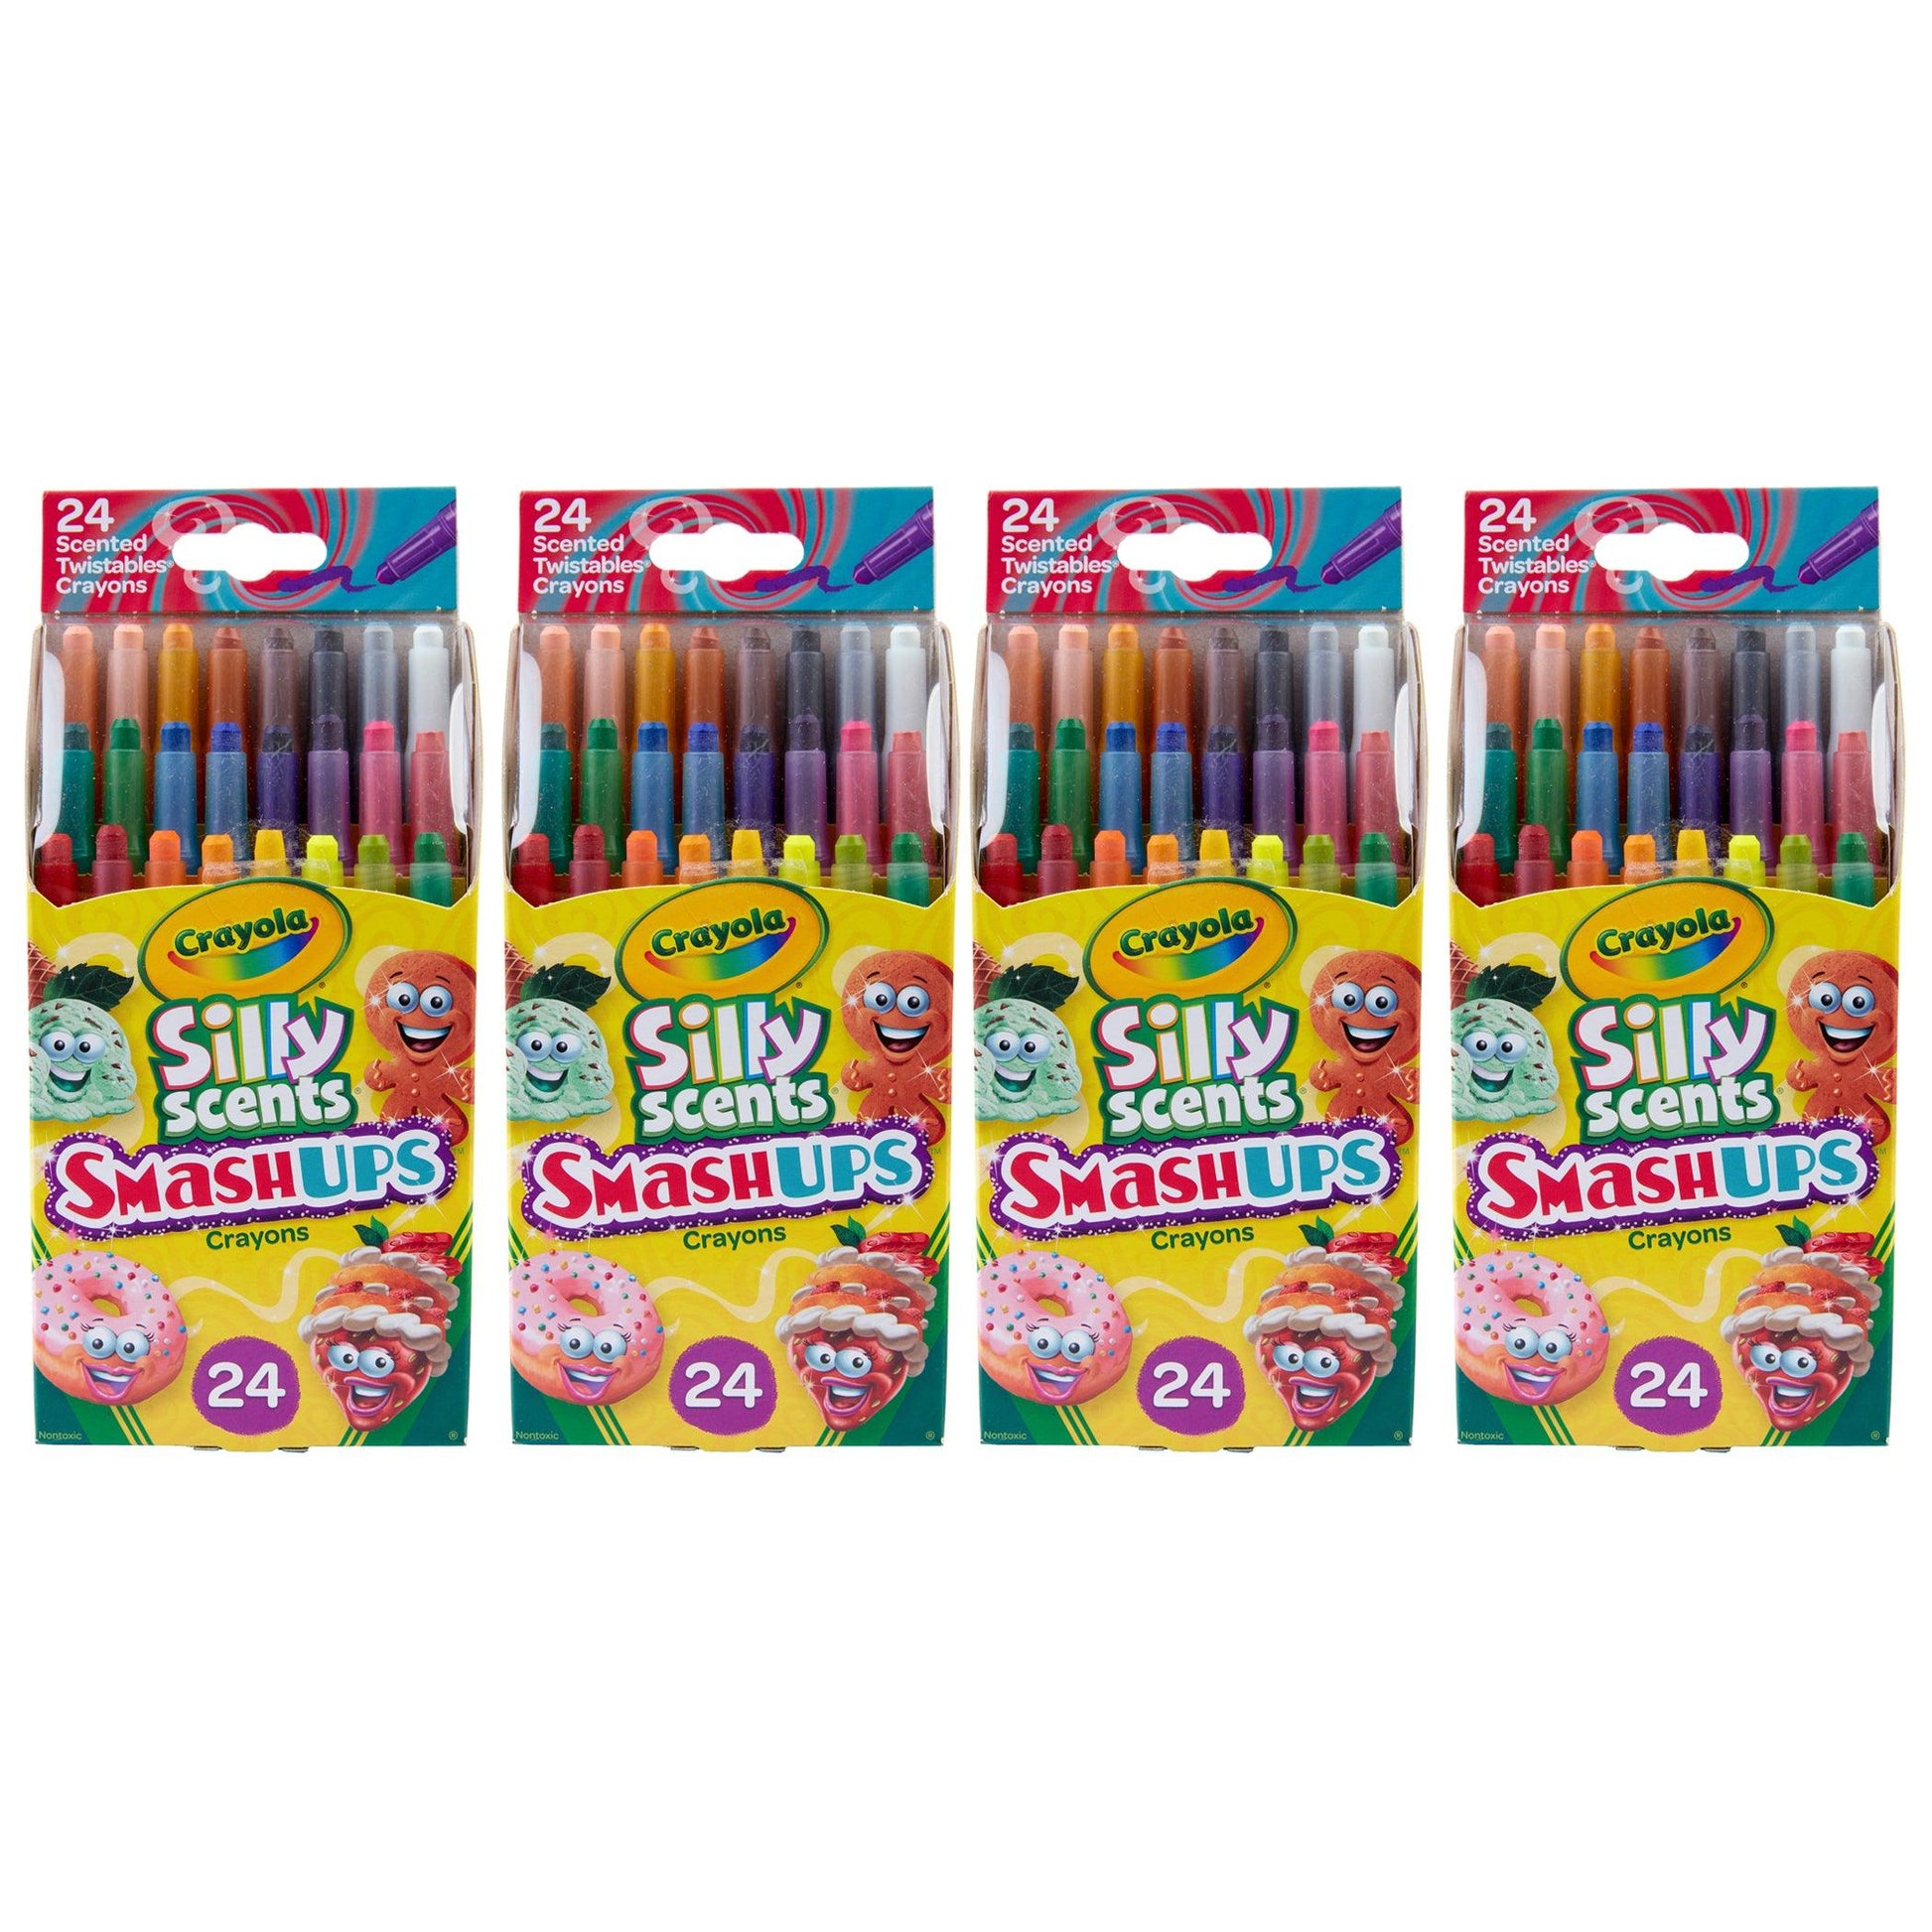 Silly Scents™ Smash Ups Mini Twistables Scented Crayons, 24 Per Pack, 4 Packs - Loomini